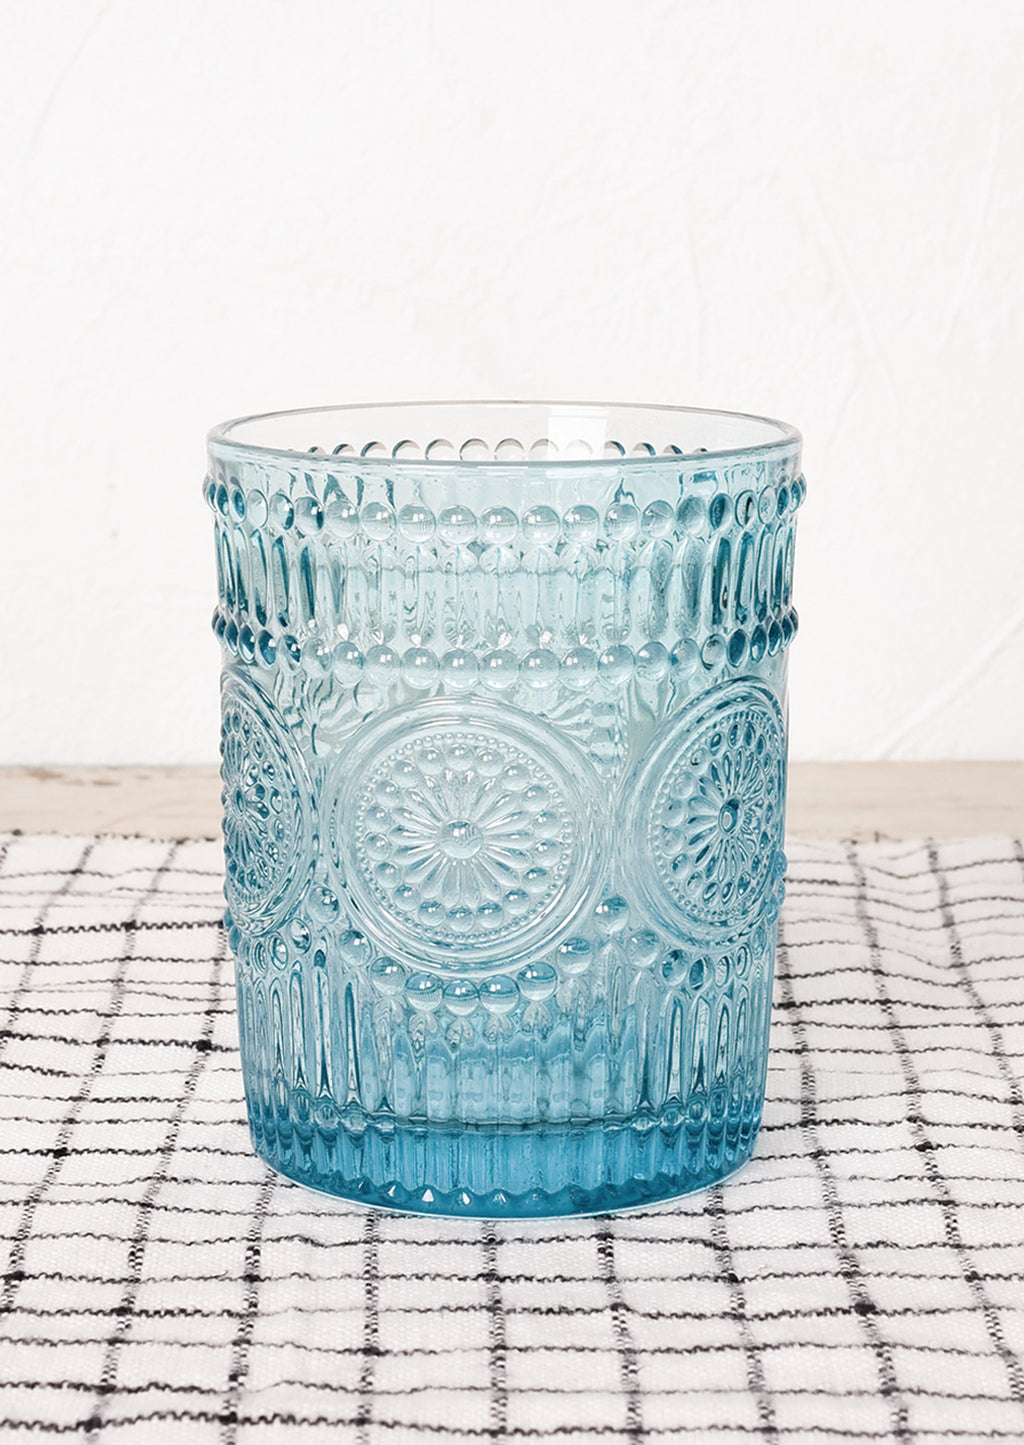 Turquoise: A turquoise glass cup in embossed design.